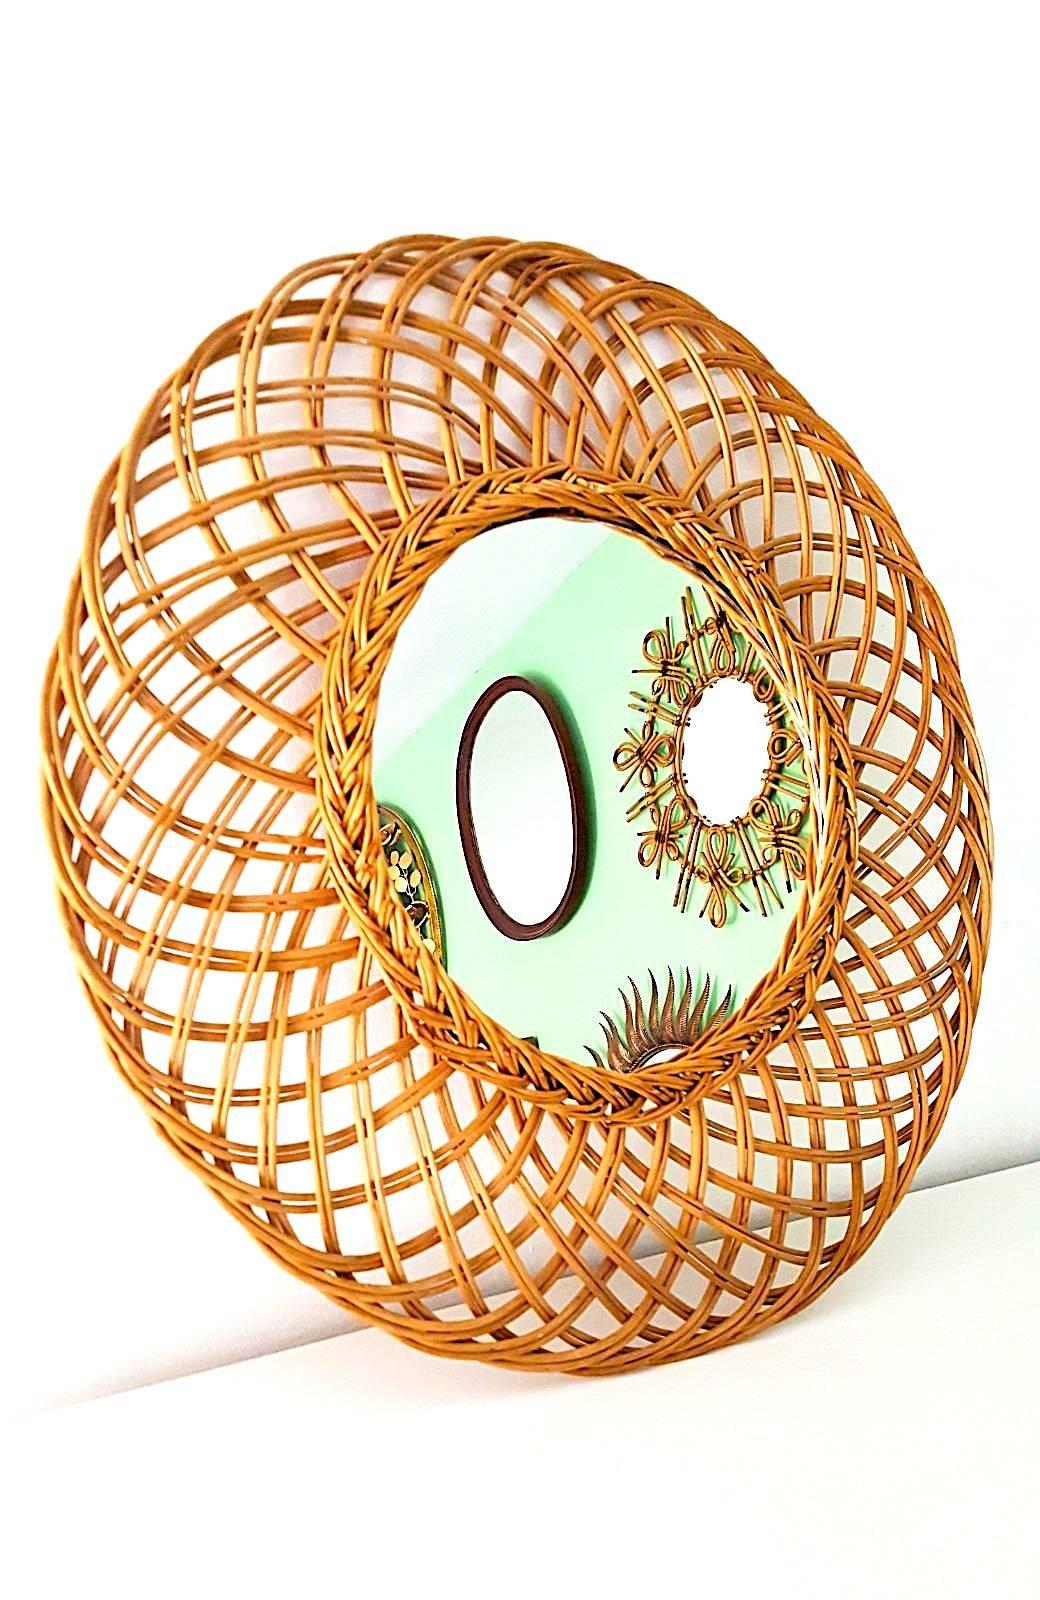 Lovely handcrafted rattan sunburst shape details.
This piece has all the taste of the Saint Tropez Riviera Mediterranean coast style and it is in excellent vintage condition.
South France Riviera, 1950s.
Beautiful to place in a wall decoration